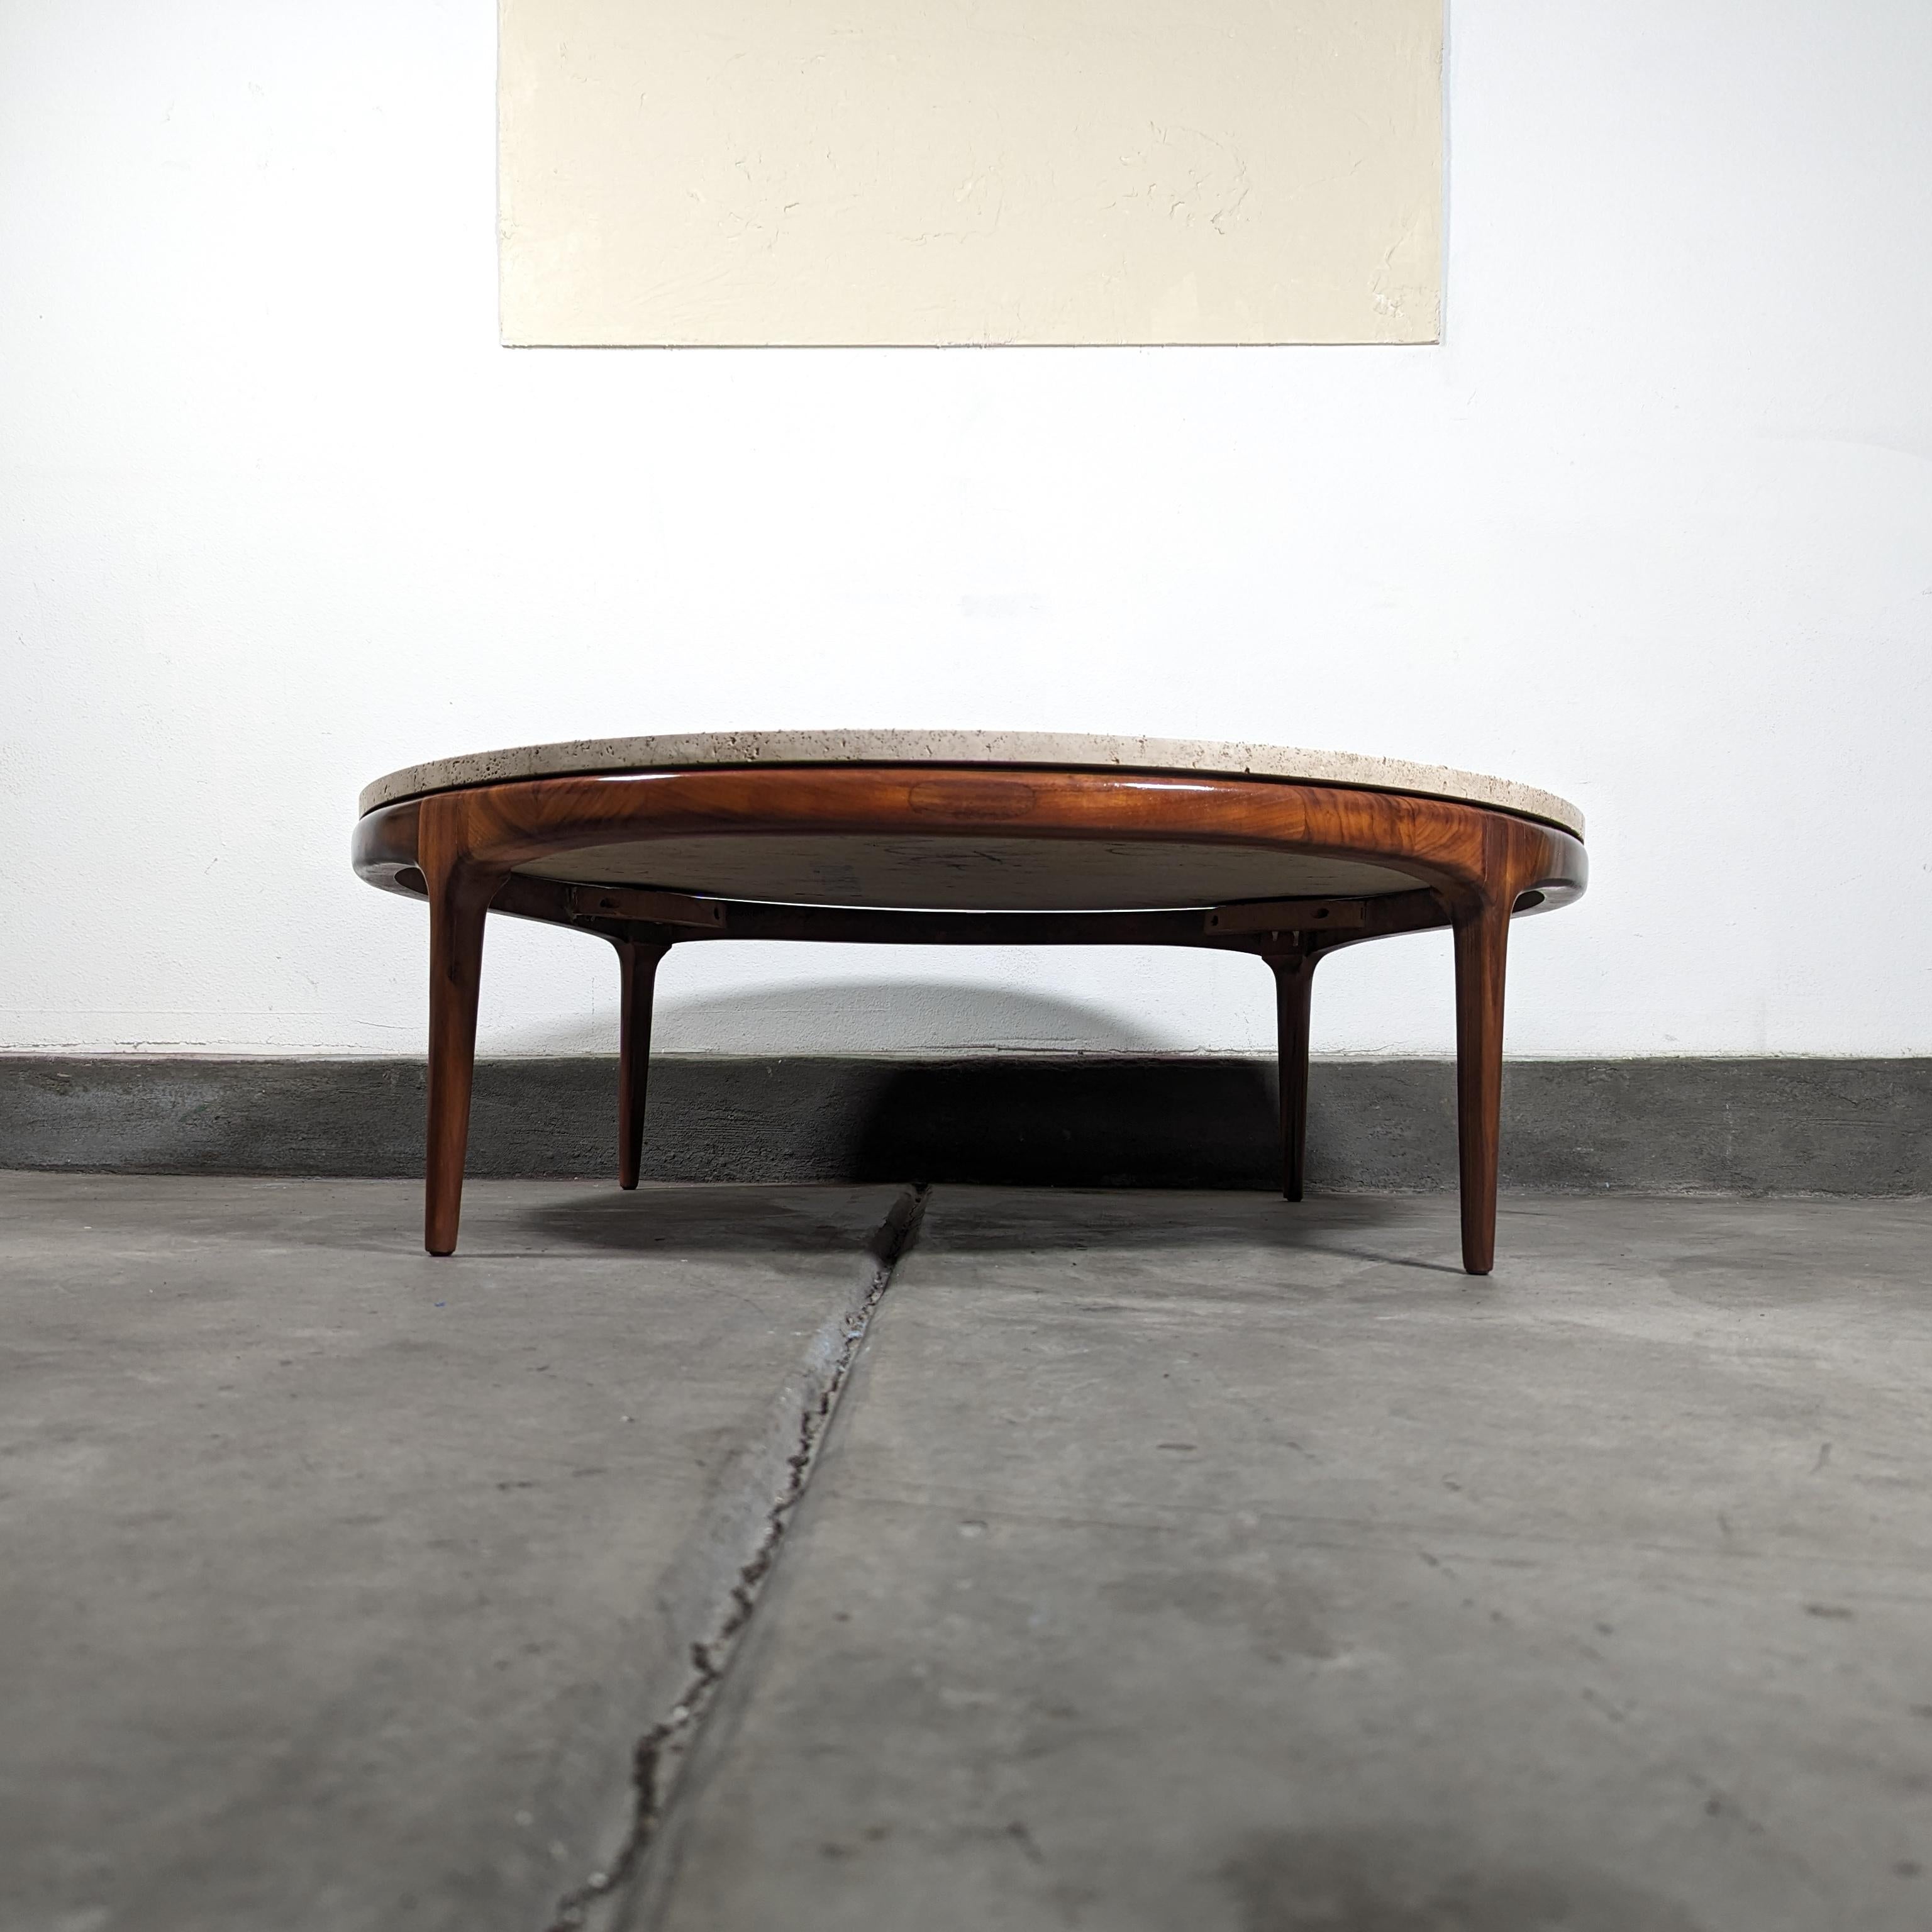 Mid Century Modern Walnut Rythm Coffee Table with Travertine Top by Lane, c1960s For Sale 3